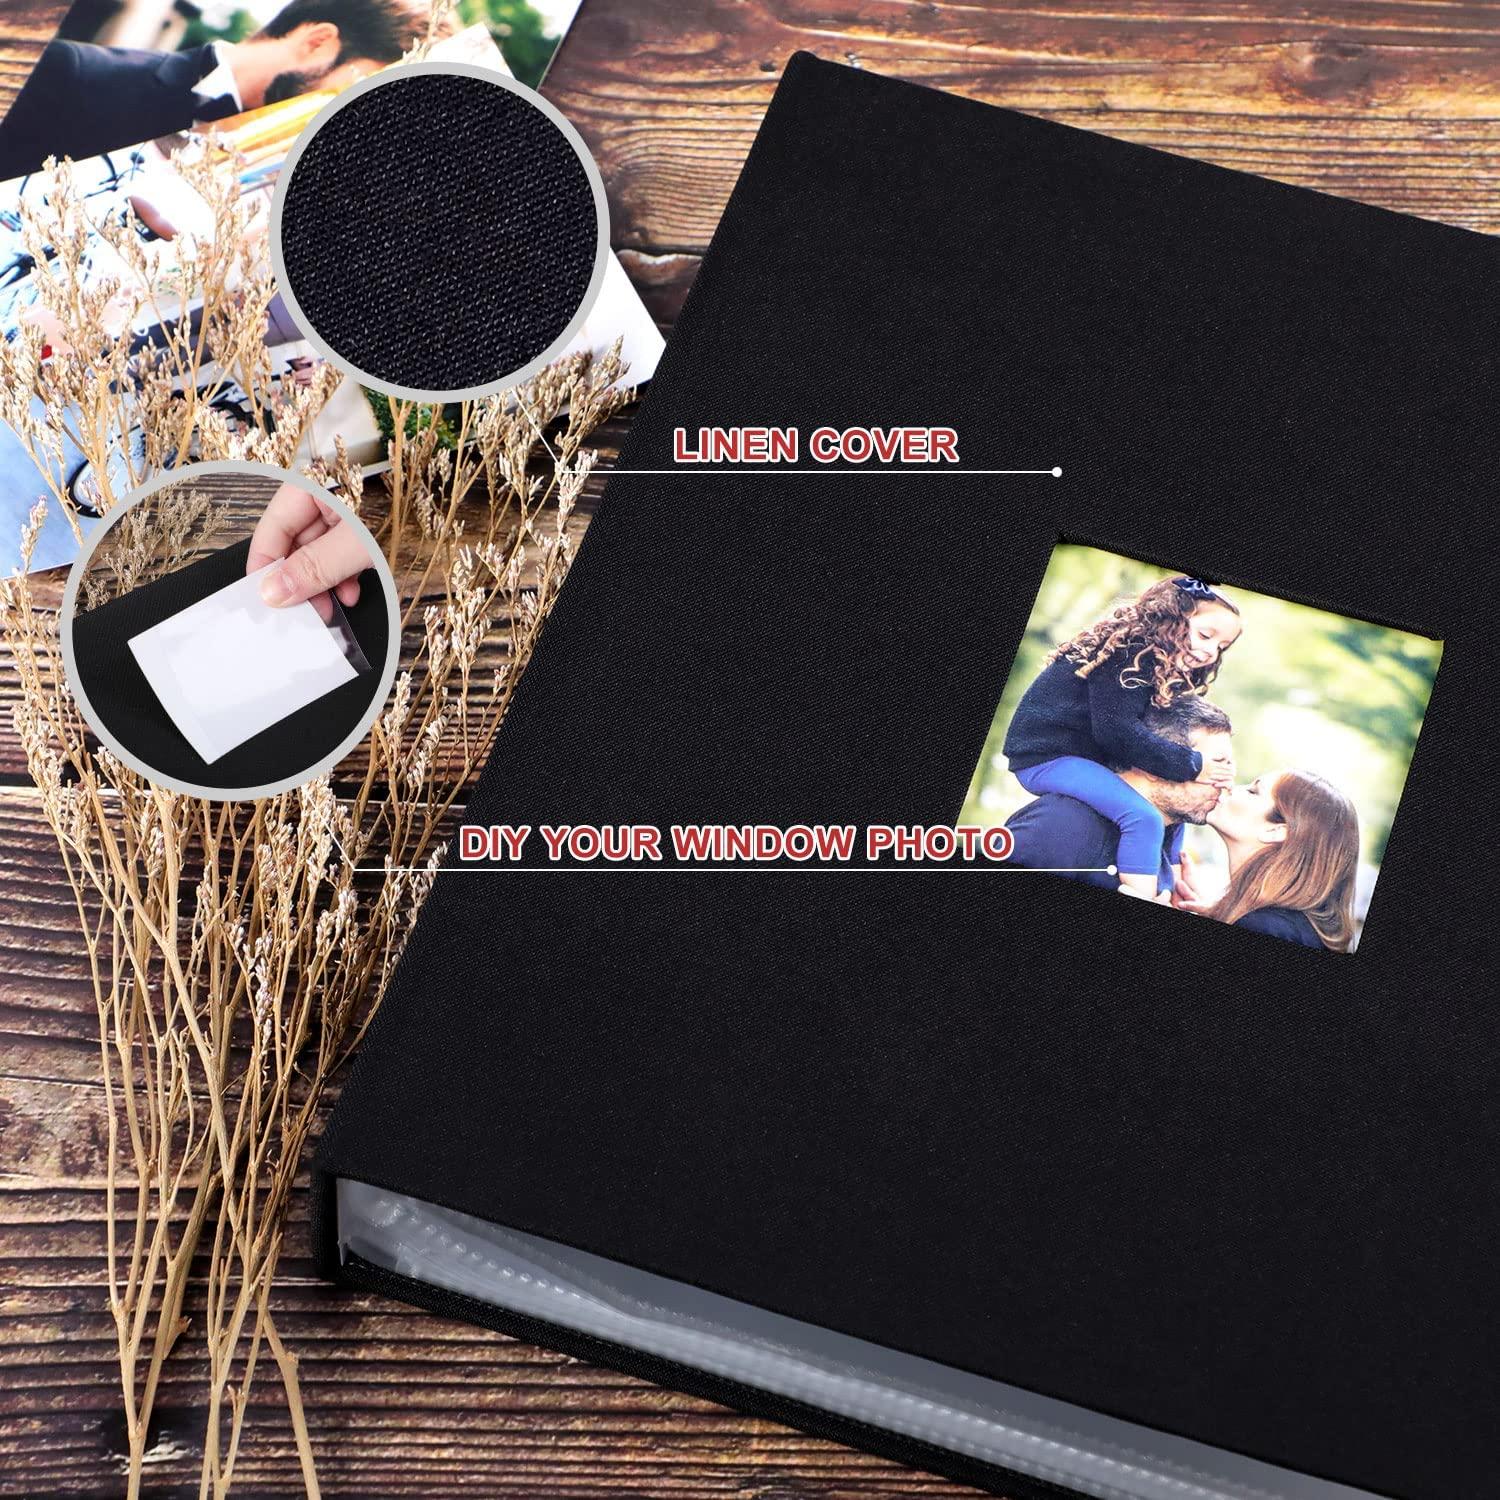 Lanpn Photo Album 11x14, Linen Hard Cover Acid Free Slip Slide in Photo  Albums Sleeves Holds 100 Top Load Vertical Only 11x14 Pictures (Black)